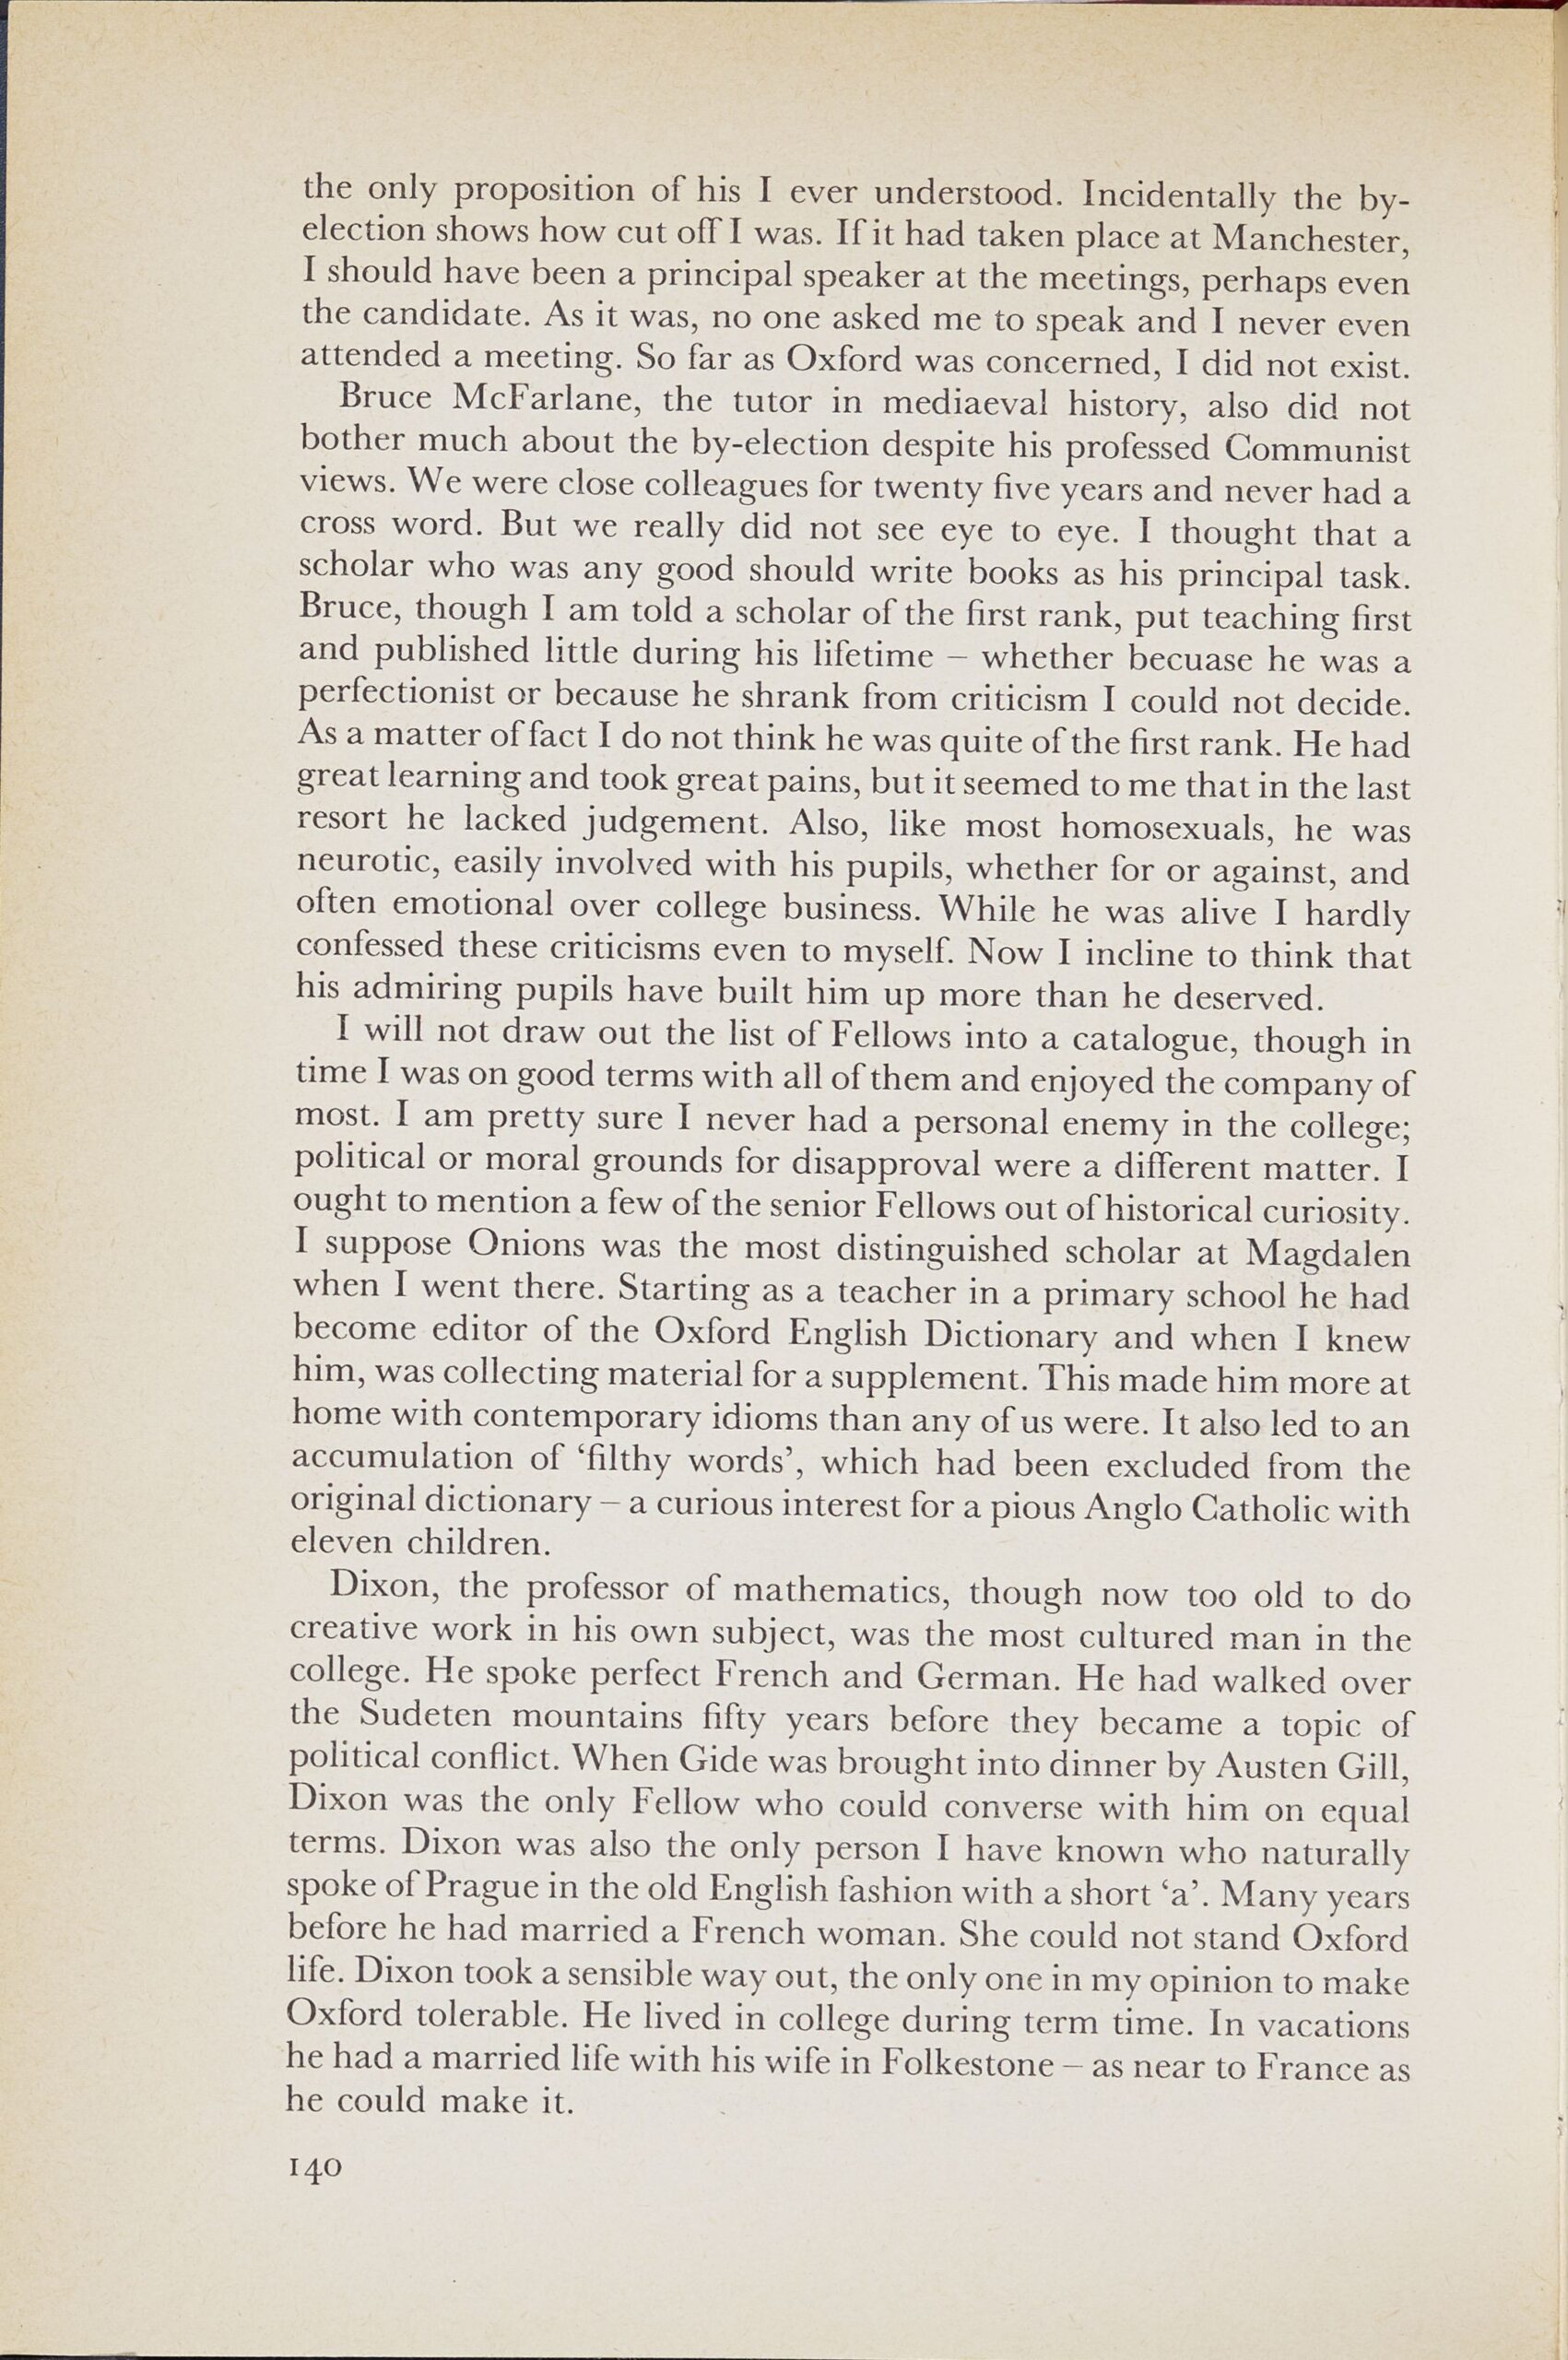 Page from a book. Text reads: the only proposition of his I ever understood. Incidentally the byelection shows how cut off I was. If it had taken place at Manchester, I should have been a principal speaker at the meetings, perhaps even the candidate. As it was, no one asked me to speak and I never even attended a meeting. So far as Oxford was concerned, I did not exist. Bruce McFarlane, the tutor in mediaeval history, also did not bother much about the by-election despite his professed Communist views. We were close colleagues for twenty five years and never had a cross word. But we really did not see eye to eye. I thought that a scholar who was any good should write books as his principal task. Bruce, though I am told a scholar of the first rank, put teaching first and published little during his lifetime — whether becuase he was a perfectionist or because he shrank from criticism I could not decide. As a matter of fact I do not think he was quite of the first rank. He had great learning and took great pains, but it seemed to me that in the last resort he lacked judgement. Also, like most homosexuals, he was neurotic, easily involved with his pupils, whether for or against, and often emotional over college business. While he was alive I hardly confessed these criticisms even to myself. Now I incline to think that his admiring pupils have built him up more than he deserved. I will not draw out the list of Fellows into a catalogue, though in time I was on good terms with all of them and enjoyed the company of most. I am pretty sure I never had a personal enemy in the college; political or moral grounds for disapproval were a different matter. I ought to mention a few of the senior Fellows out of historical curiosity. I suppose Onions was the most distinguished scholar at Magdalen when I went there. Starting as a teacher in a primary school he had become editor of the Oxford English Dictionary and when I knew him, was collecting material for a supplement. This made him more at home with contemporary idioms than any of us were. It also led to an accumulation of `filthy words', which had been excluded from the original dictionary — a curious interest for a pious Anglo Catholic with eleven children. Dixon, the professor of mathematics, though now too old to do creative work in his own subject, was the most cultured man in the college. He spoke perfect French and German. He had walked over the Sudeten mountains fifty years before they became a topic of political conflict. When Gide was brought into dinner by Austen Gill, Dixon was the only Fellow who could converse with him on equal terms. Dixon was also the only person I have known who naturally spoke of Prague in the old English fashion with a short 'a'. Many years before he had married a French woman. She could not stand Oxford life. Dixon took a sensible way out, the only one in my opinion to make Oxford tolerable. He lived in college during term time. In vacations he had a married life with his wife in Folkestone — as near to France as he could make it. 140